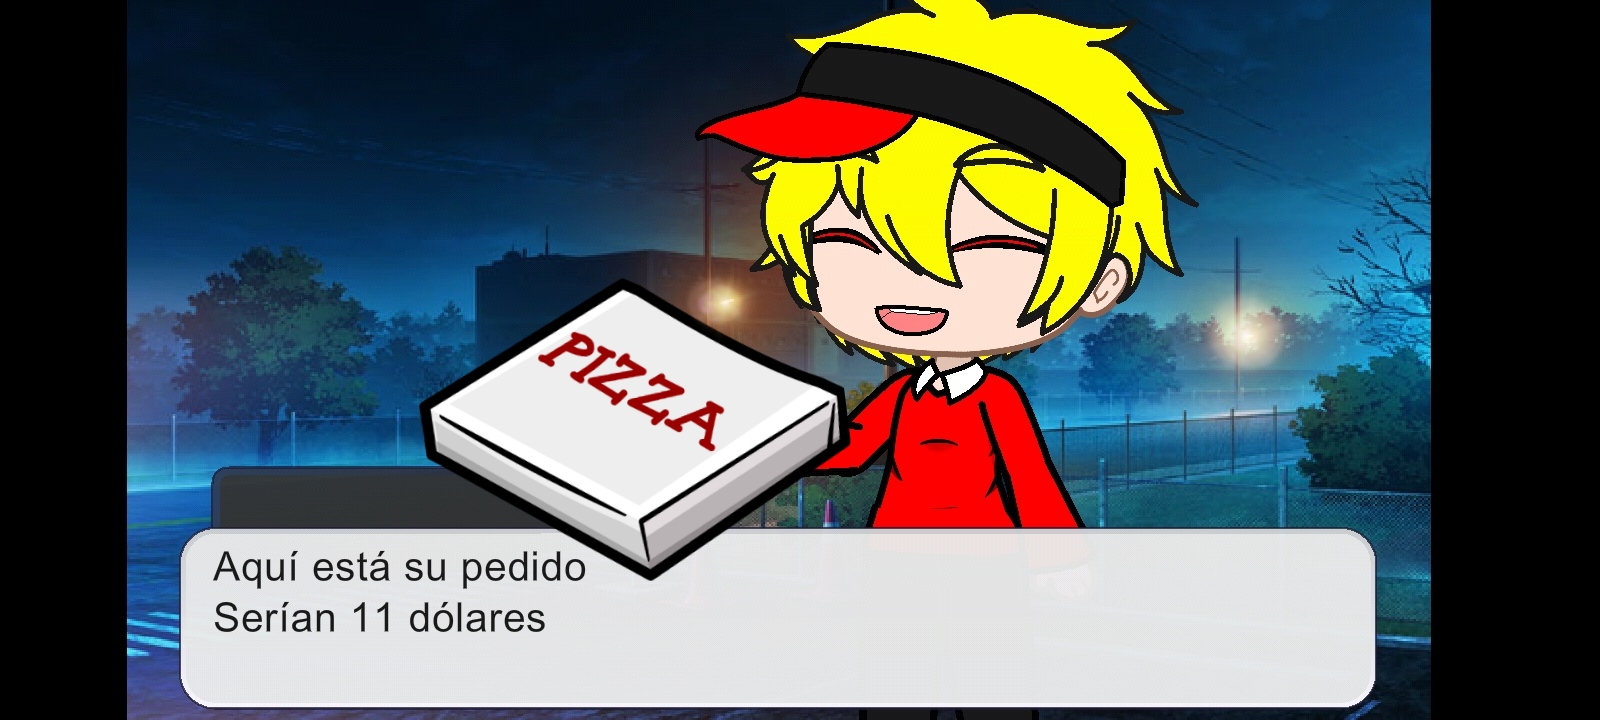 Here's your pizza! || MEME